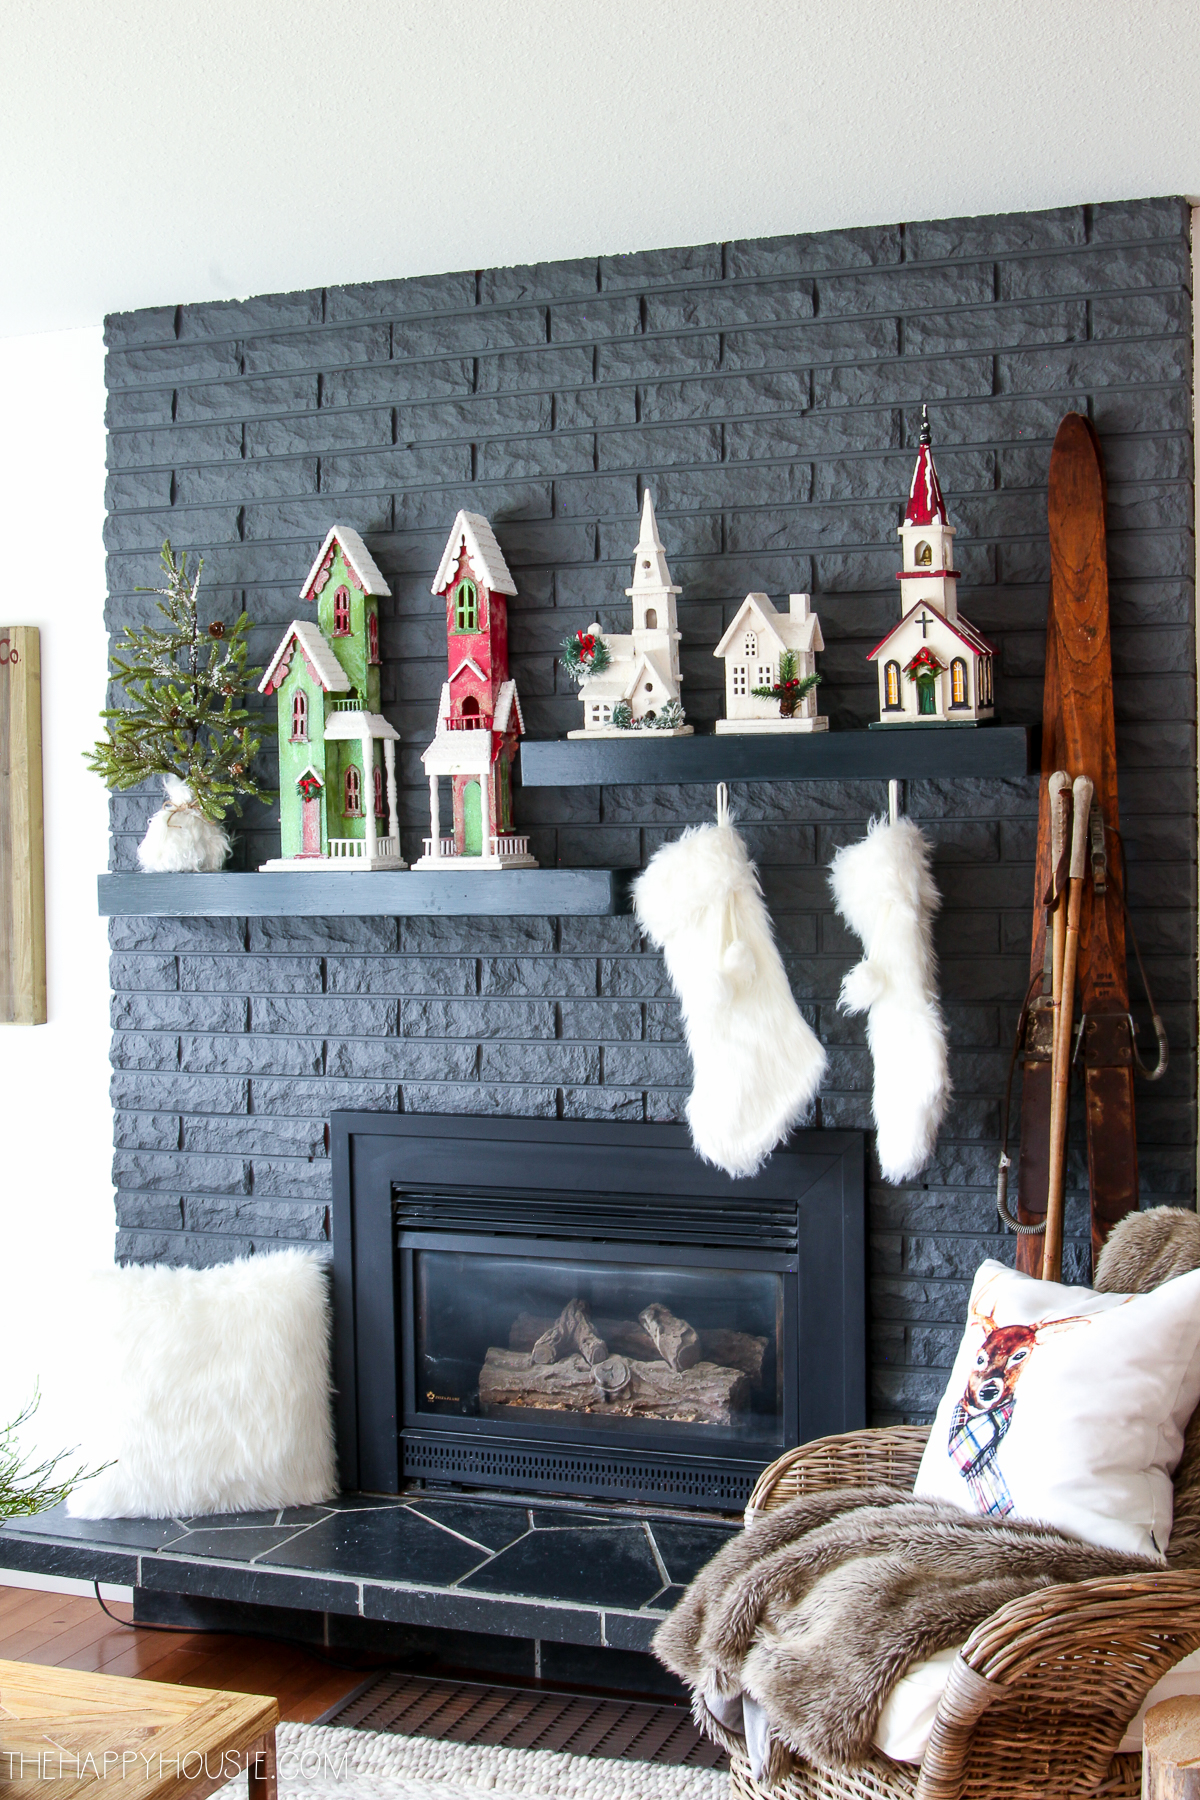 White faux fur stockings are hanging above the fireplace.